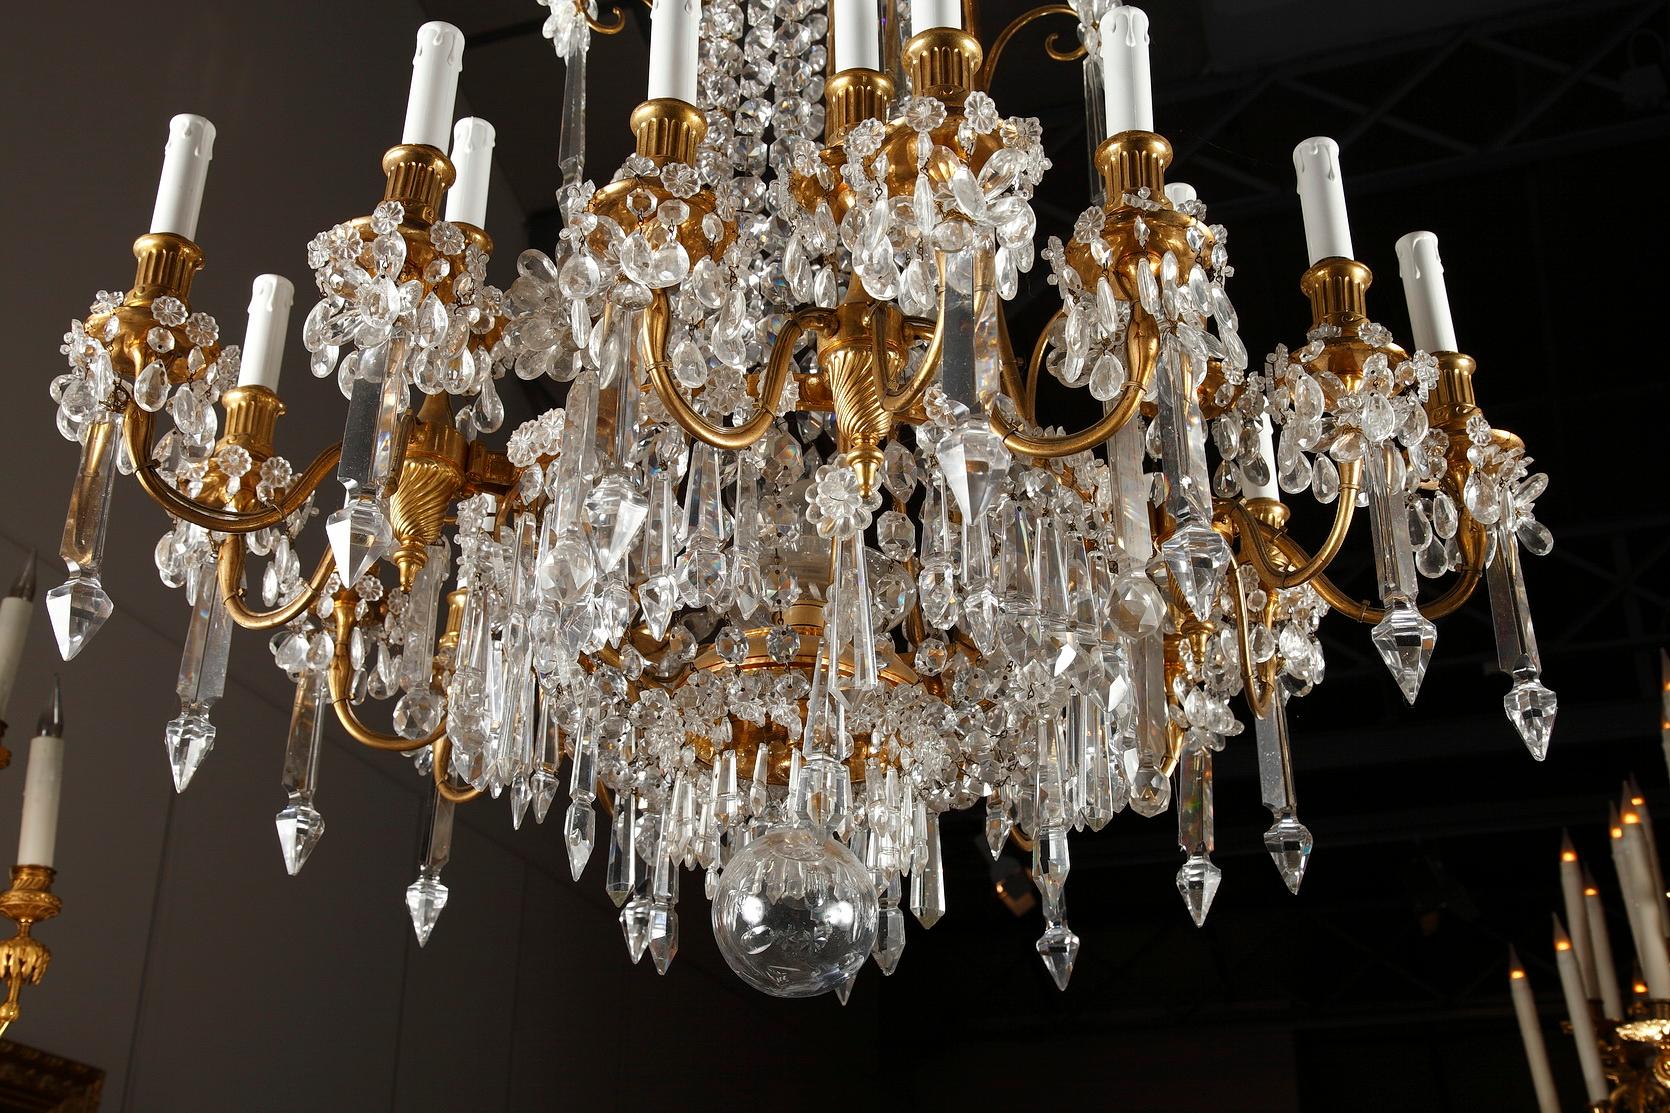 This magnificent chandelier, by the Crystal Manufacture of Baccarat, is made of gilded bronze and crystal and presents twenty lights. The tubular shaft composed by garlands made of crystal octogones is adorned with crystal flower crowns. The lower